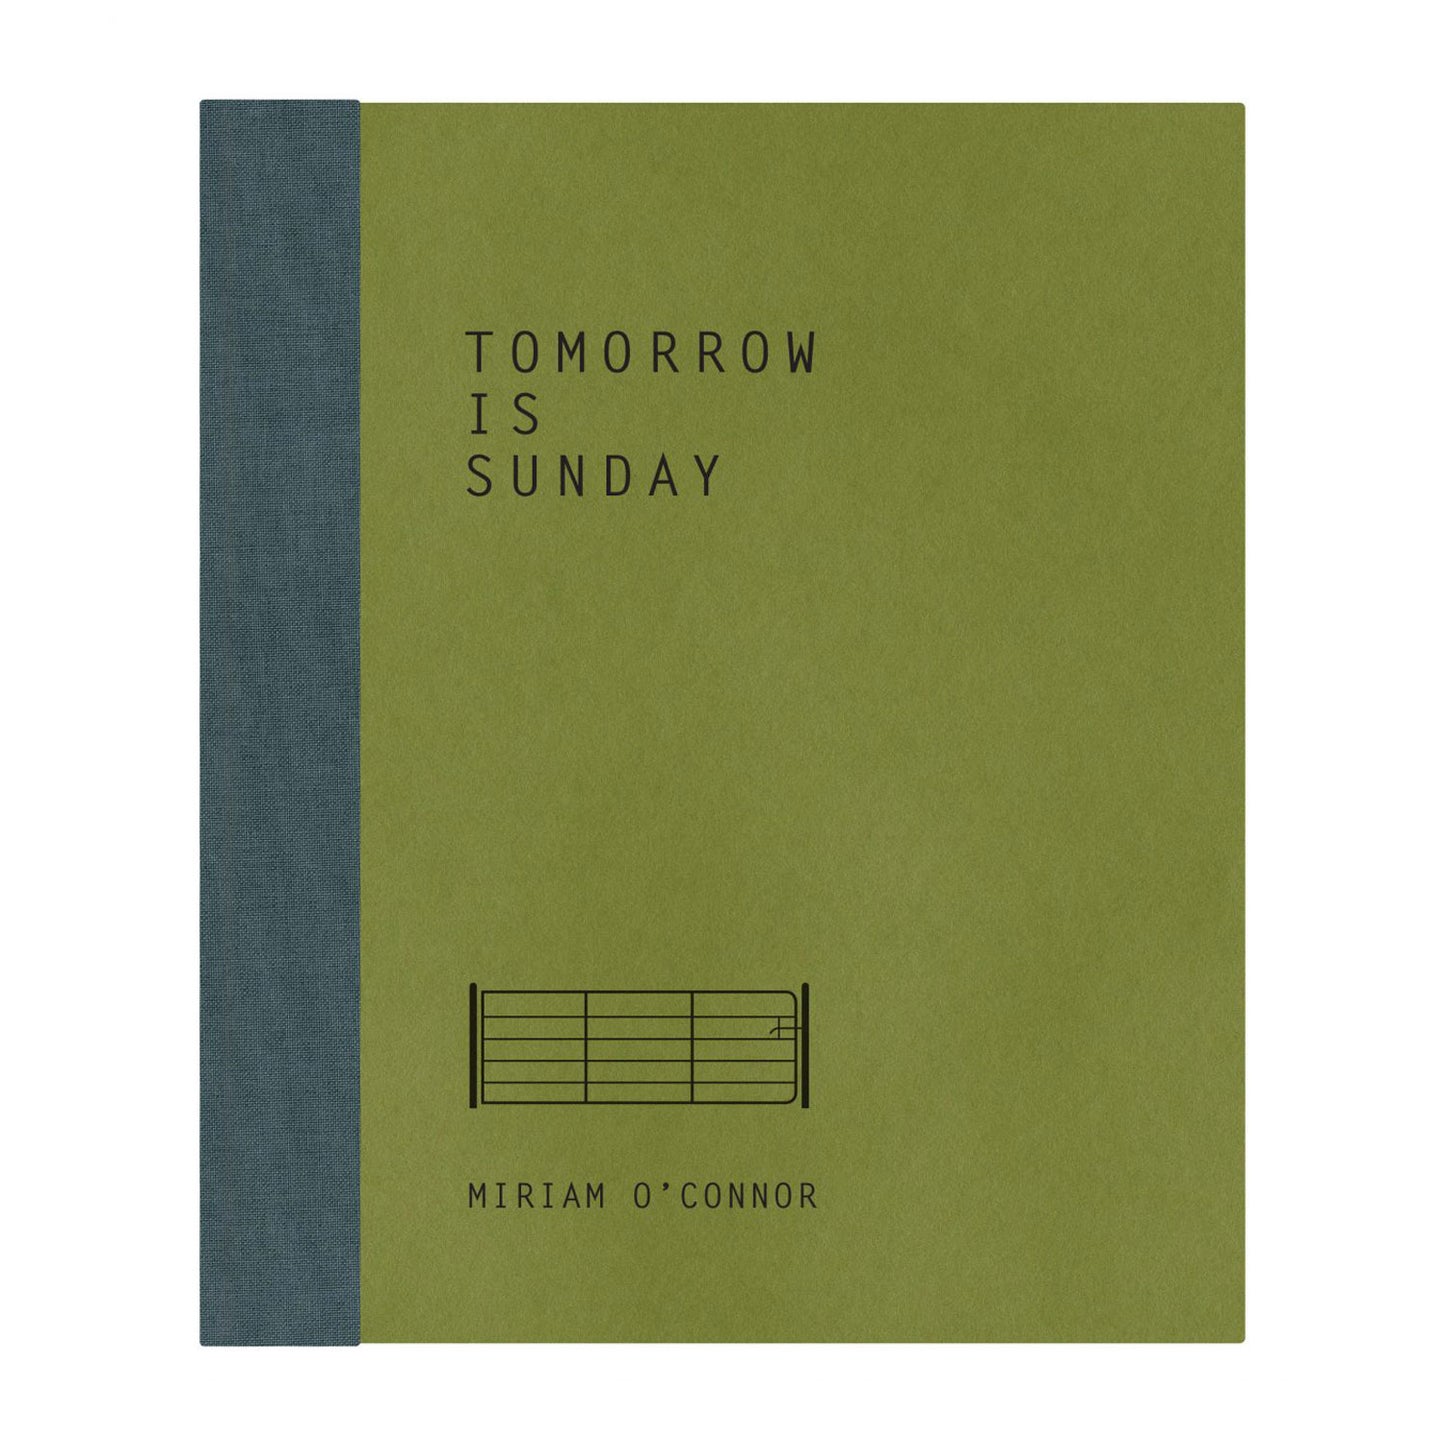 Tomorrow is Sunday (Special Edition with Print)